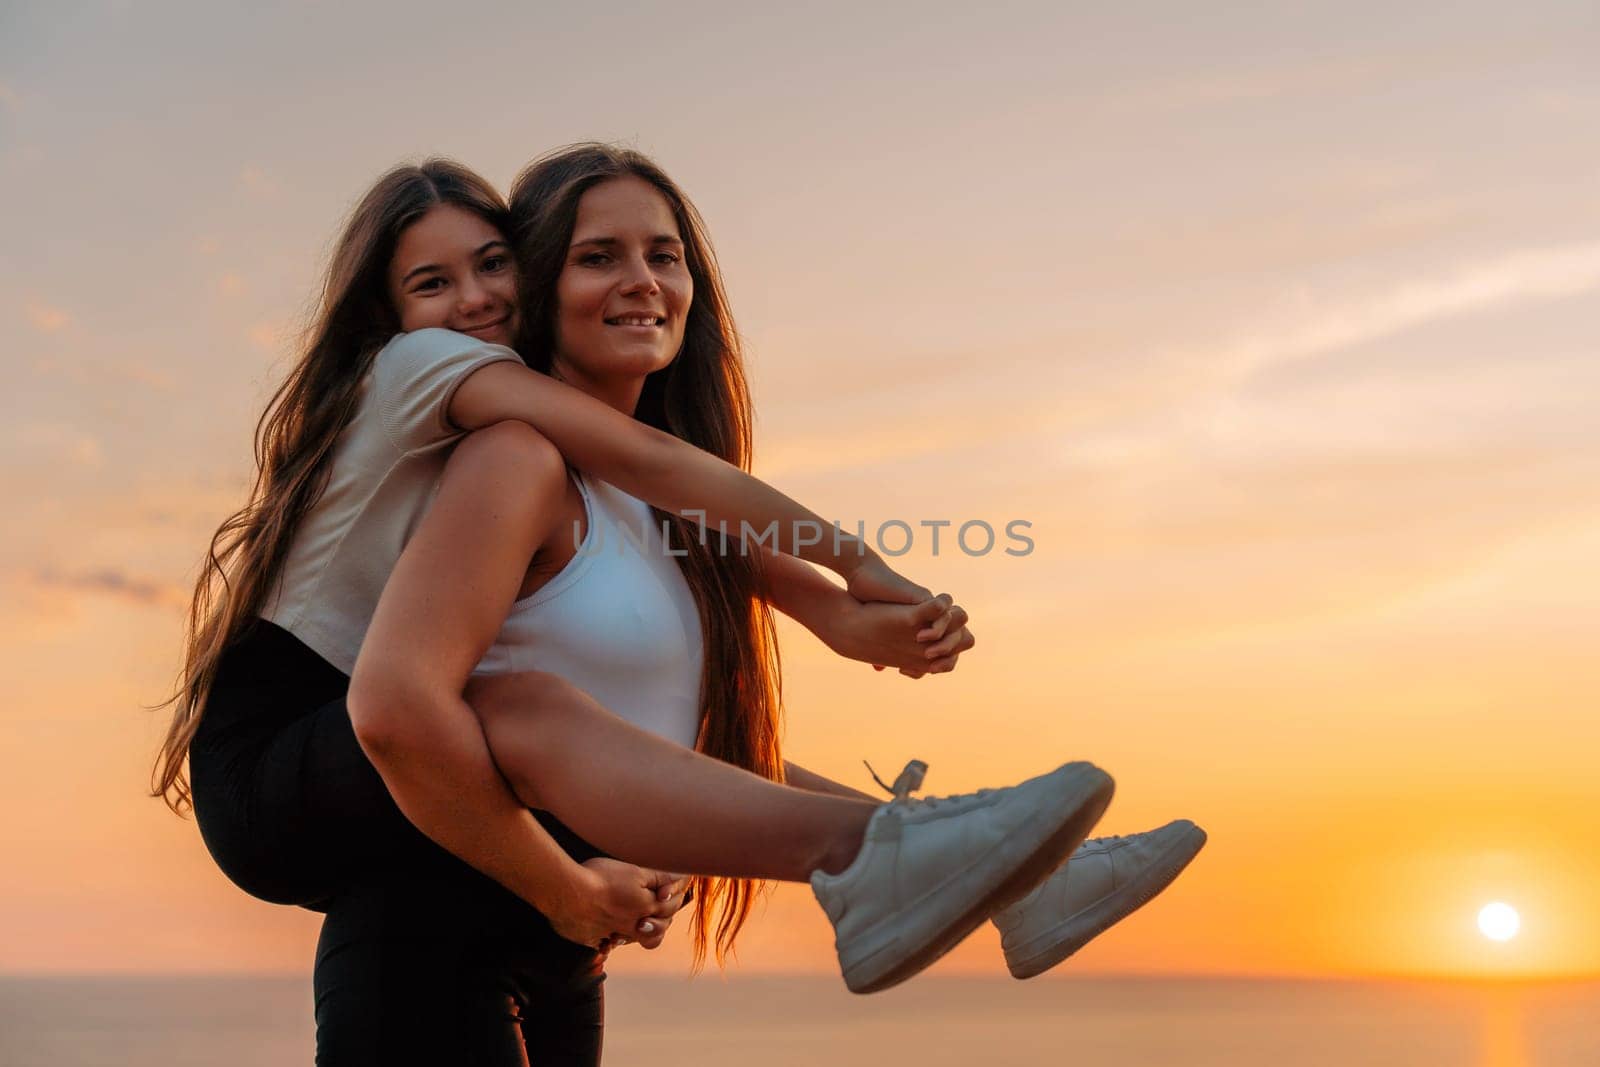 Mother carrying daughter on her back as they walk together, wearing a white shirt, and both are enjoying their time together, takes place during a sunset, adding a warm and serene atmosphere to the image. by Matiunina